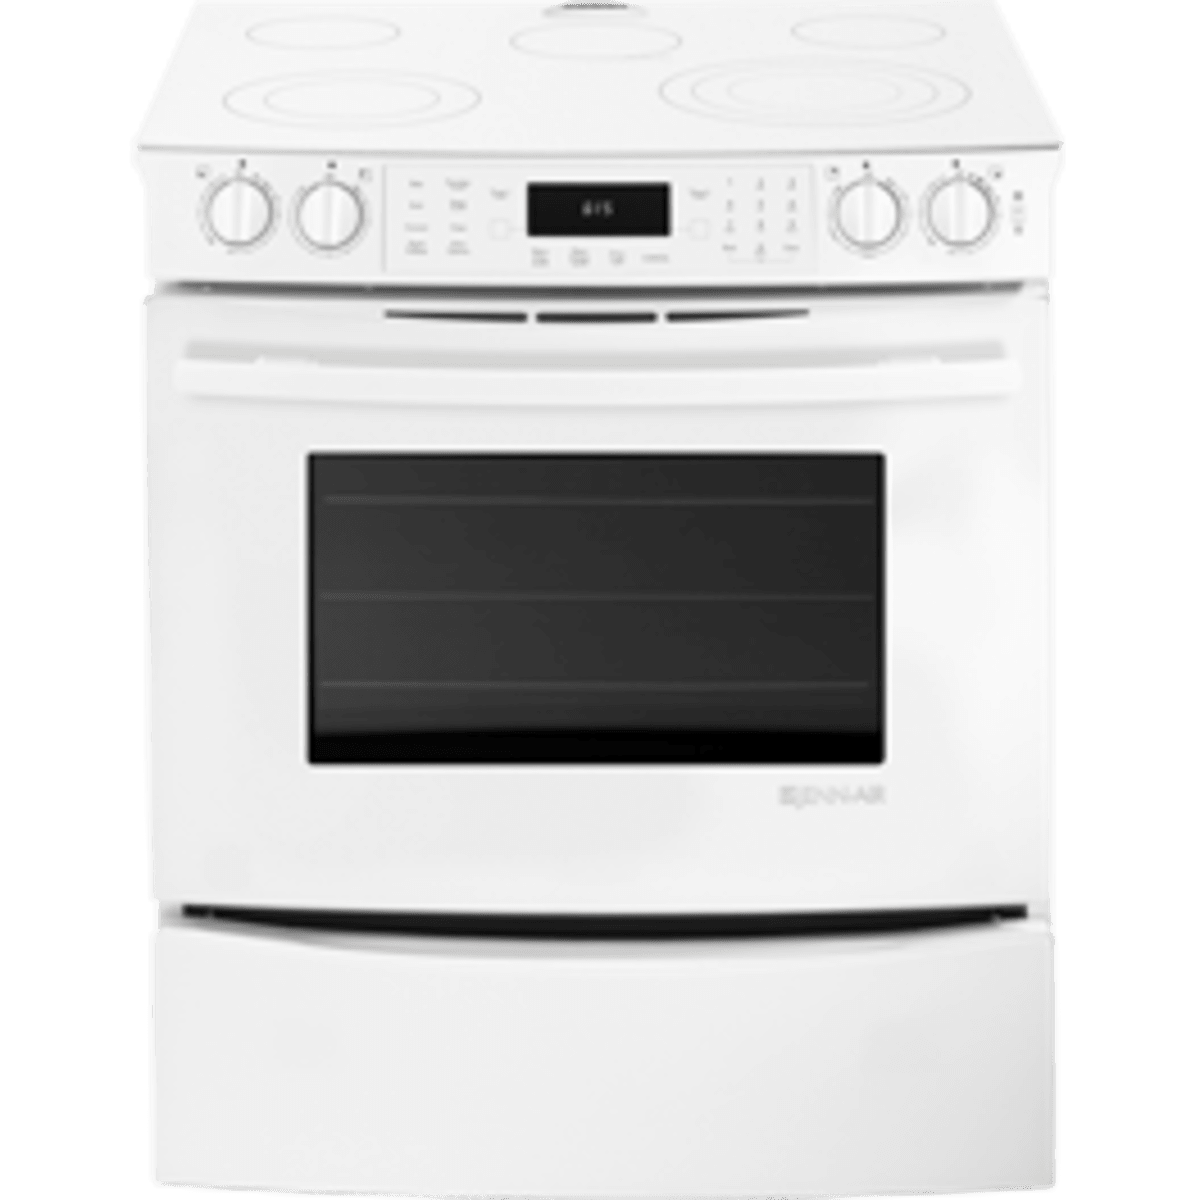 Luxury Appliances Reviews Features And Deals Reviewed